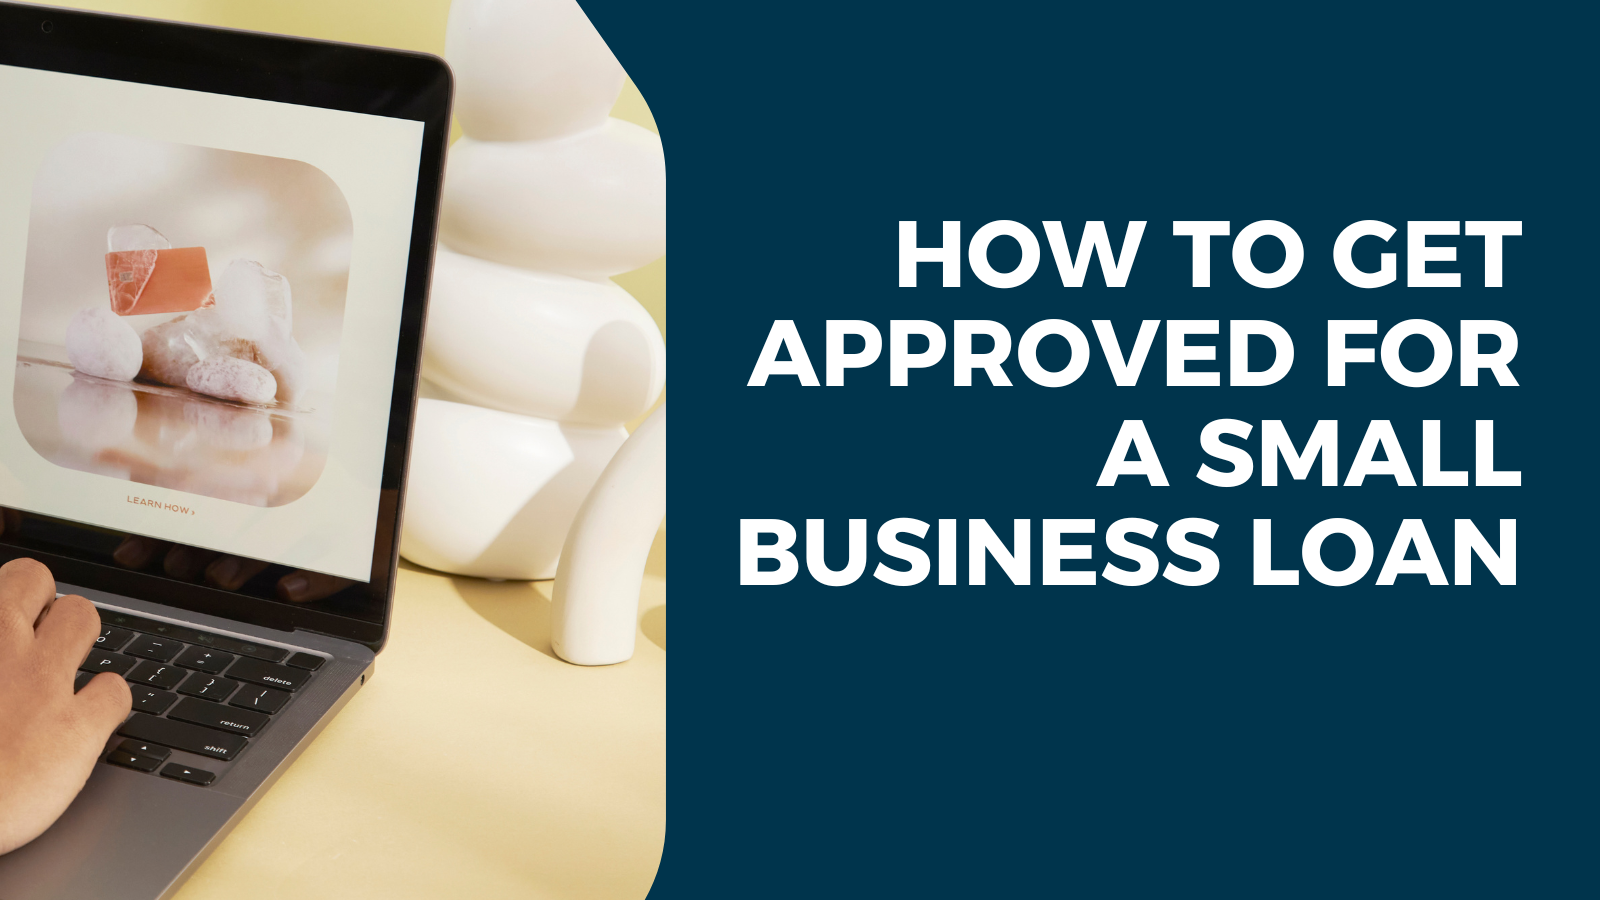 Tips to Get Approved for a Small Business Loan